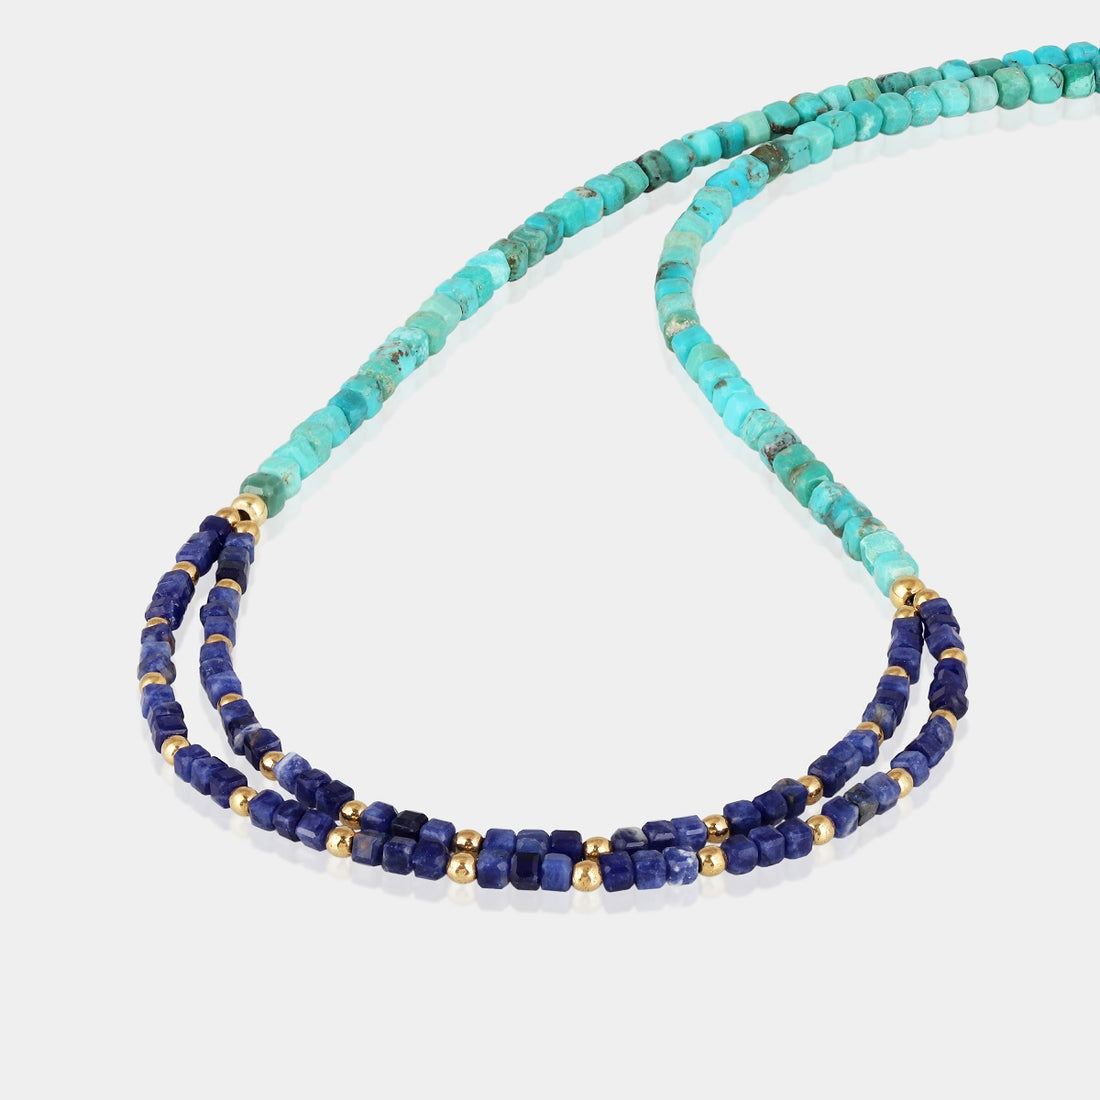 A beautiful blend of turquoise, sodalite, and hematite gemstone beads, handcrafted in sterling silver.